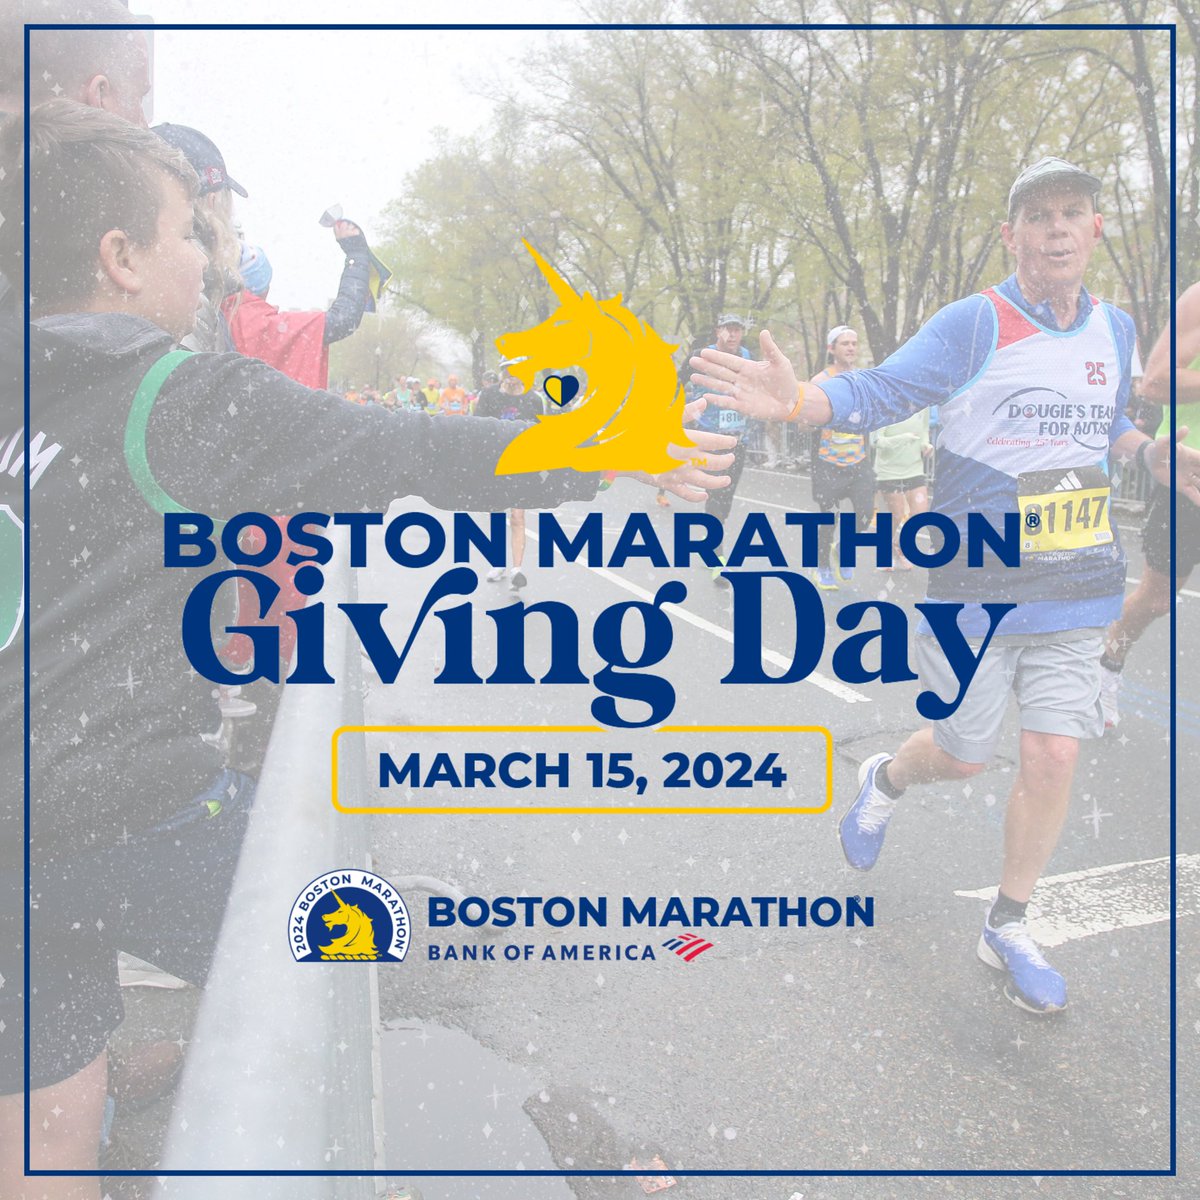 THANK YOU!😭💙💛 Together, we raised nearly $800,000 for over 200 non-profits yesterday on #BostonMarathonGivingDay!🦄 We’re now less than ONE MONTH away from the 128th Boston Marathon presented by @BankofAmerica🤯 See you on April 15th for #Boston128!